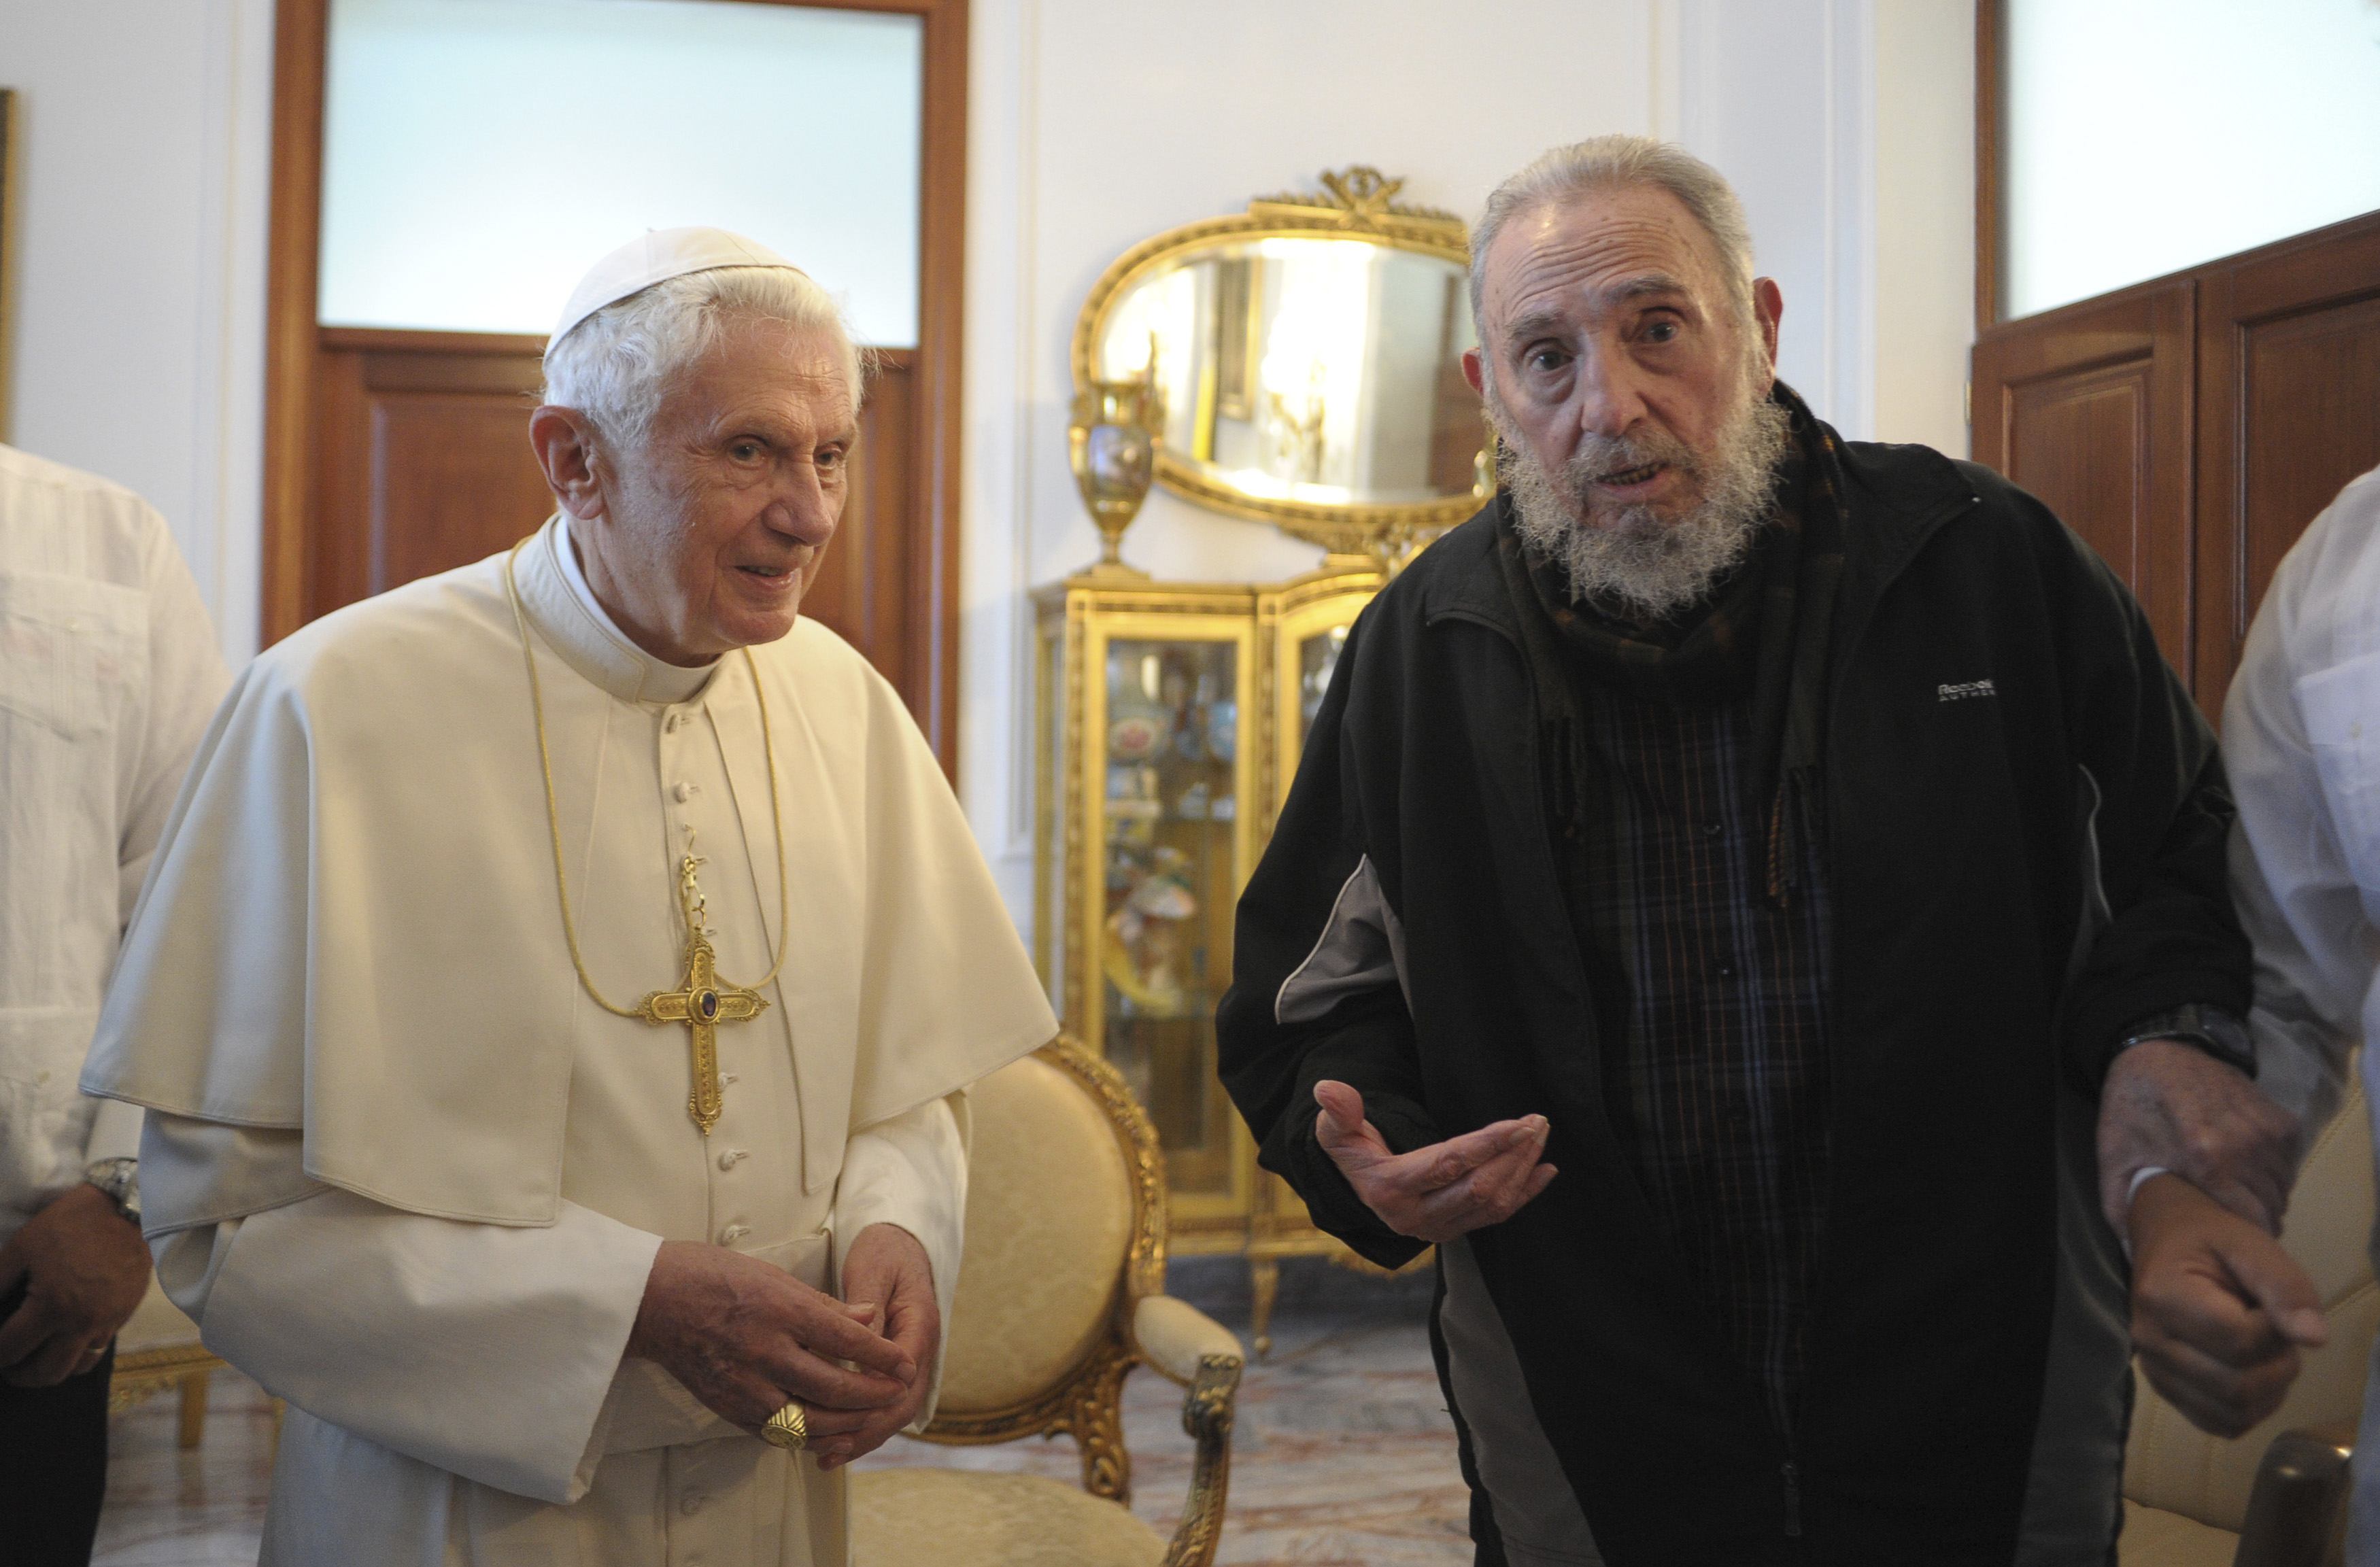 Pope Benedict XVI meets with Cuba's former President Fidel Castro at the apostolic nunciature in Havana March 28. (CNS photo/L'Osservatore Romano via Reuters) (March 28, 2012) See POPE-FIDEL March 28, 2012.